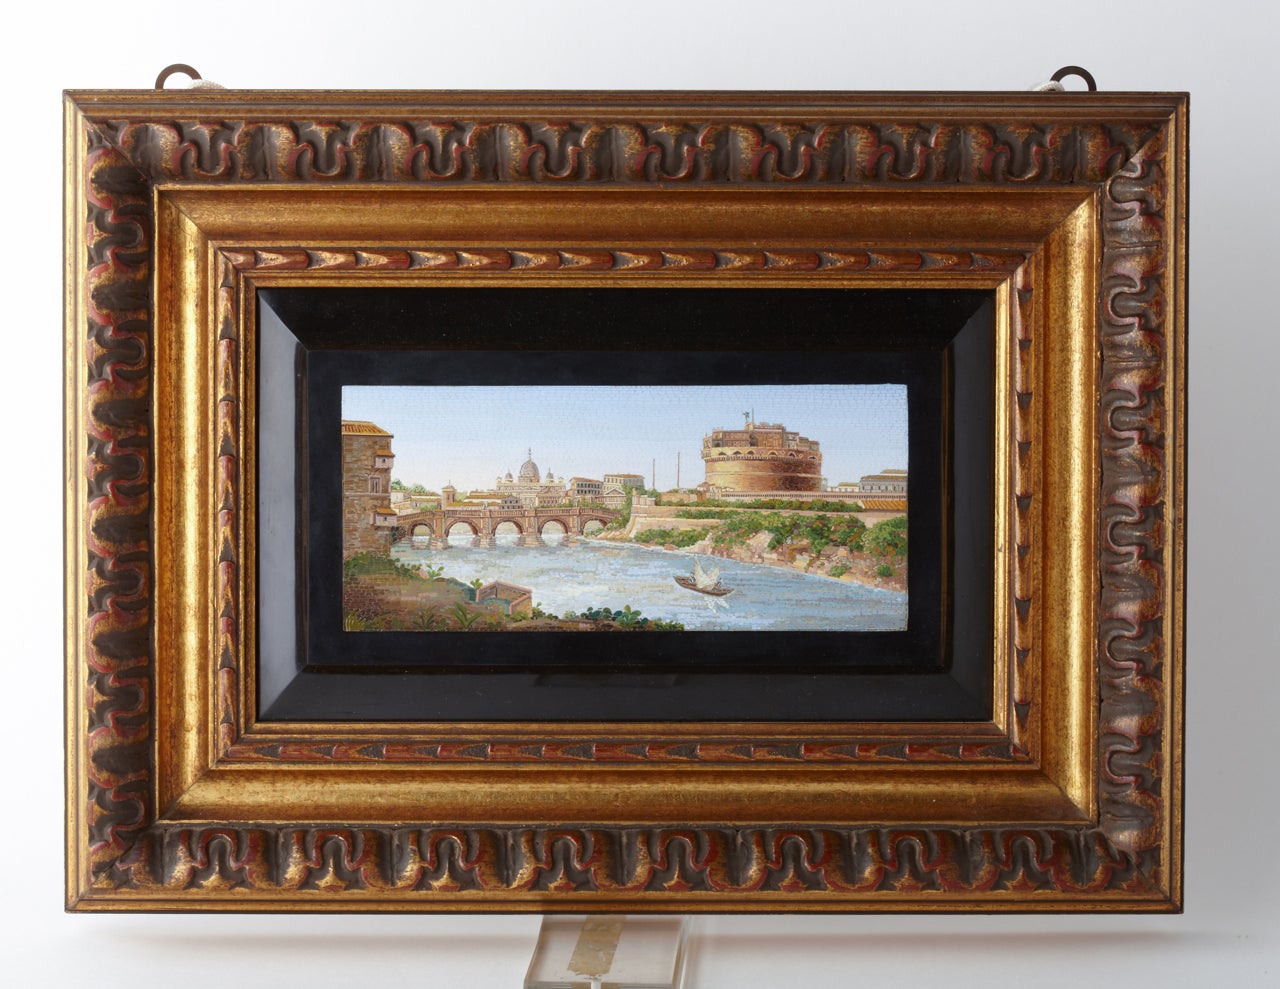 Fantastic micromosaic representing Rome's Castel Sant'Angelo, the Tiber River and the Basilica of Saint Peter on the back.

The micromosaic is in a later wooden frame. 

Roman school, 1820.